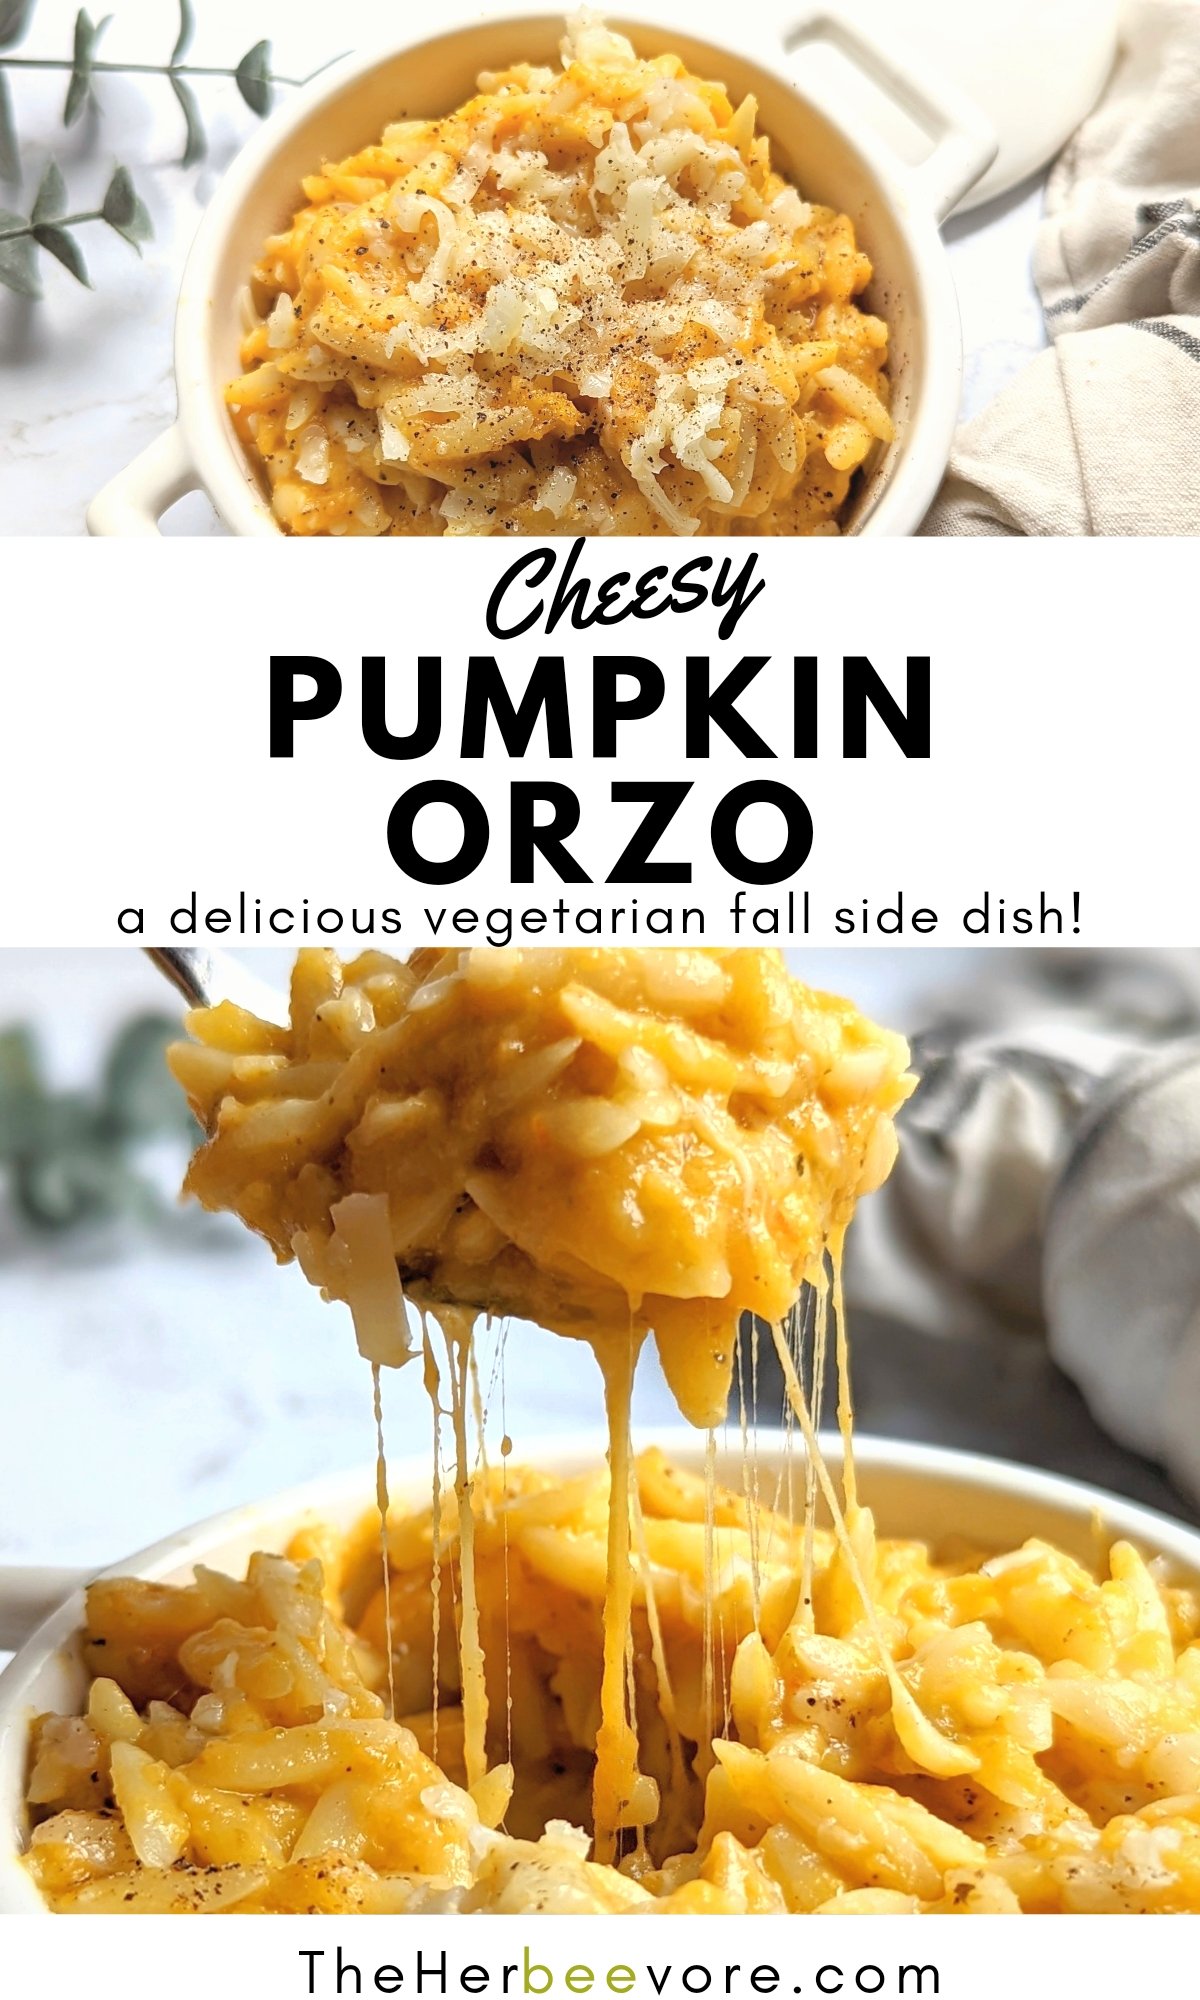 pumpkin orzo recipe vegetarian side dishes for fall autumn recipes with pumpkin savory pumpkin recipes with canned pumpkin